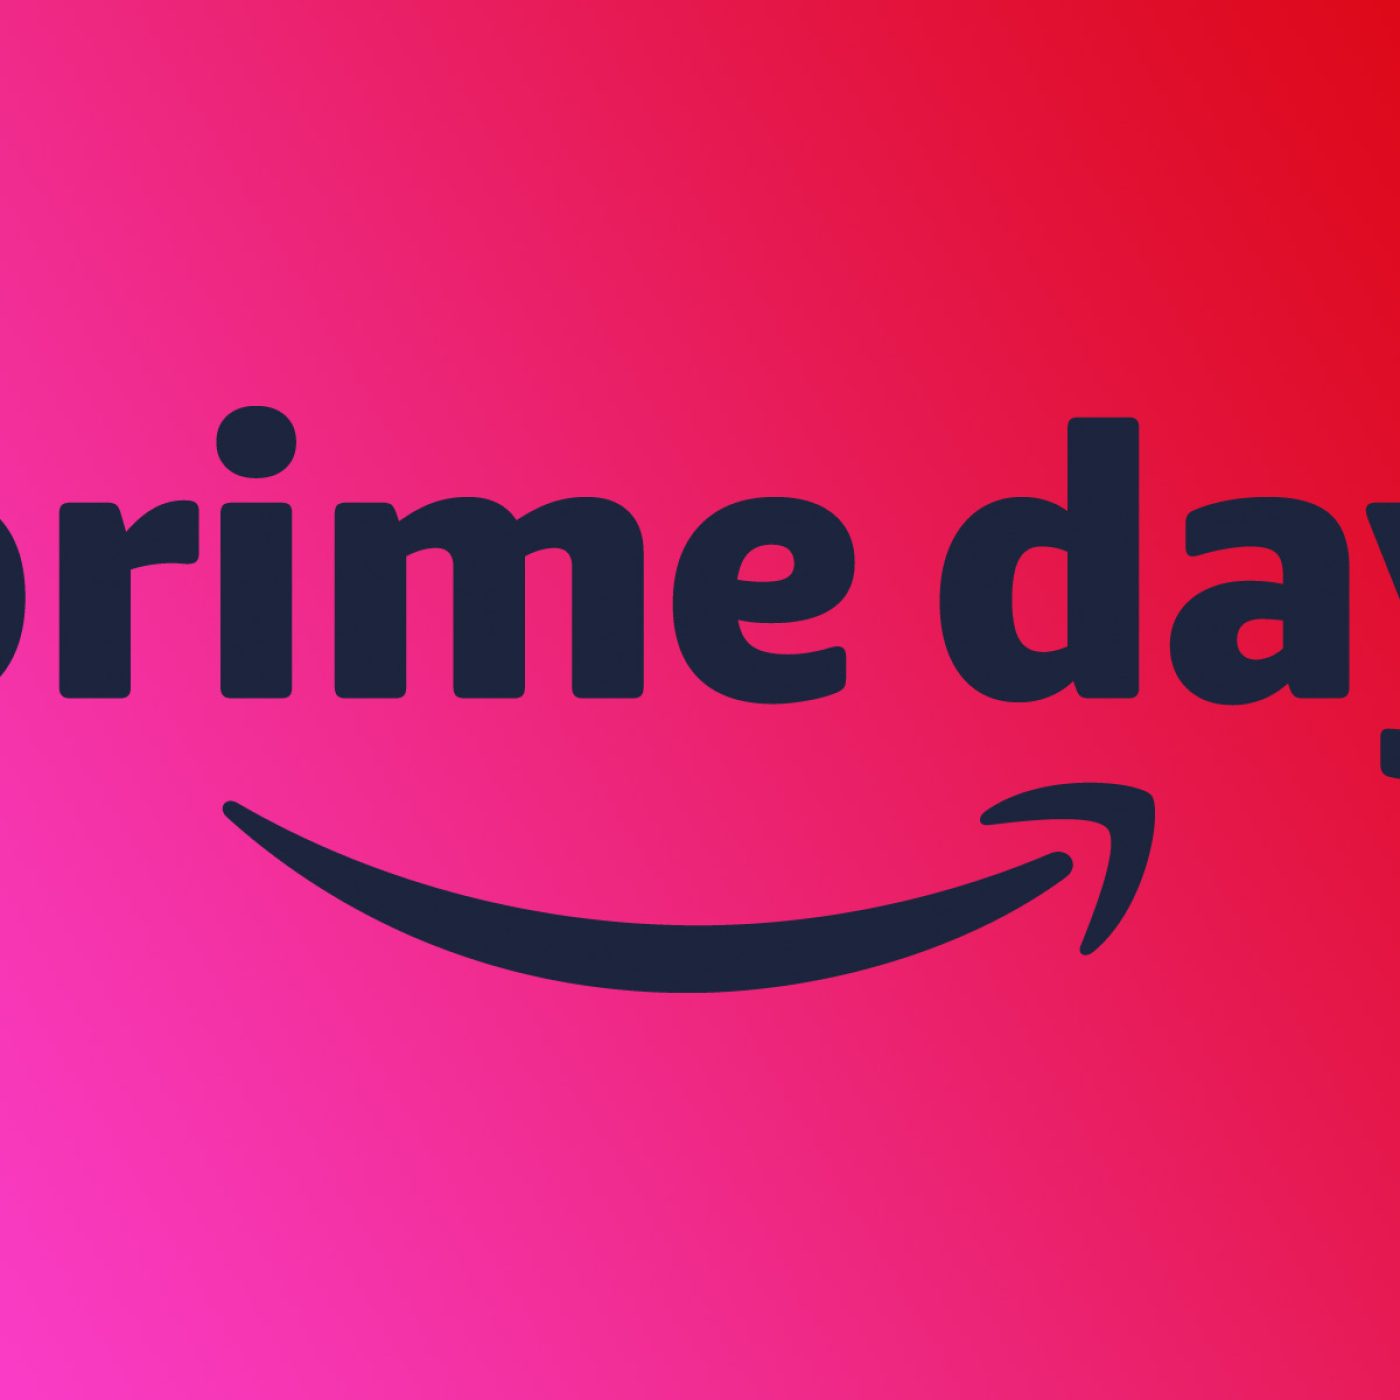 The 102+ best last-minute Prime Day deals to shop before the sale ends 